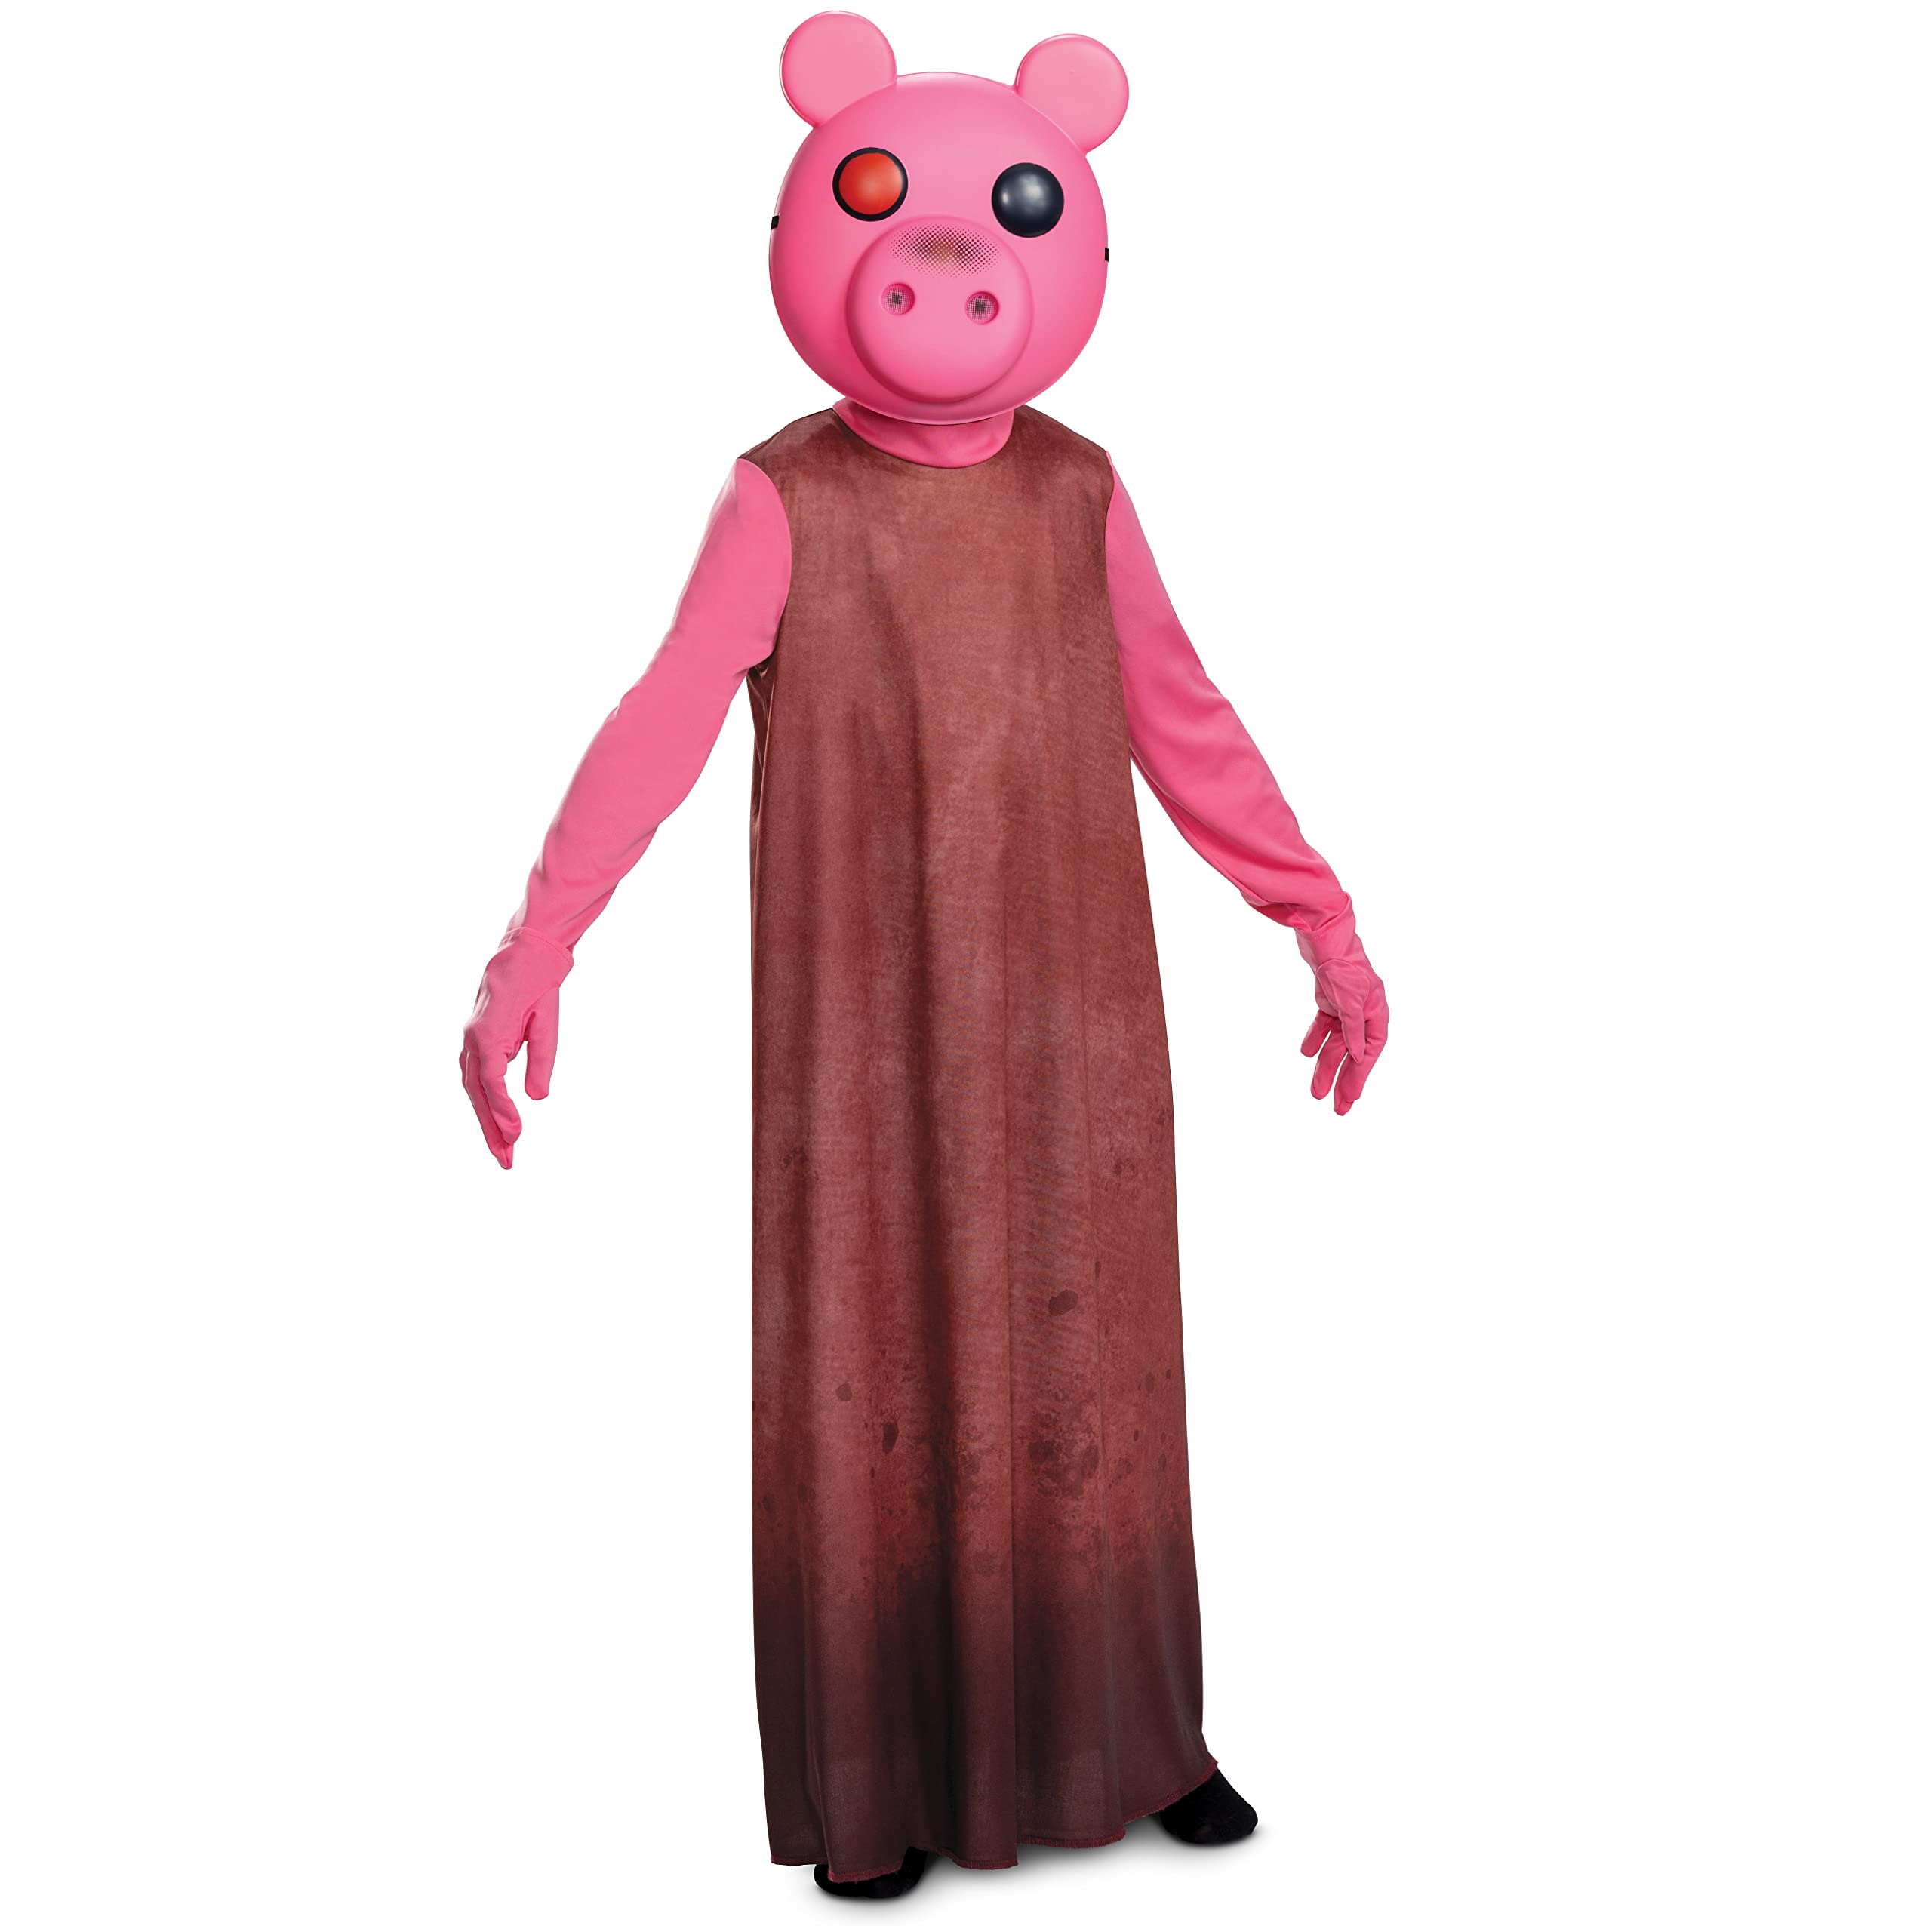 Piggy Costume for Kids, Official Piggy Video Game Costume Outfit and Mask